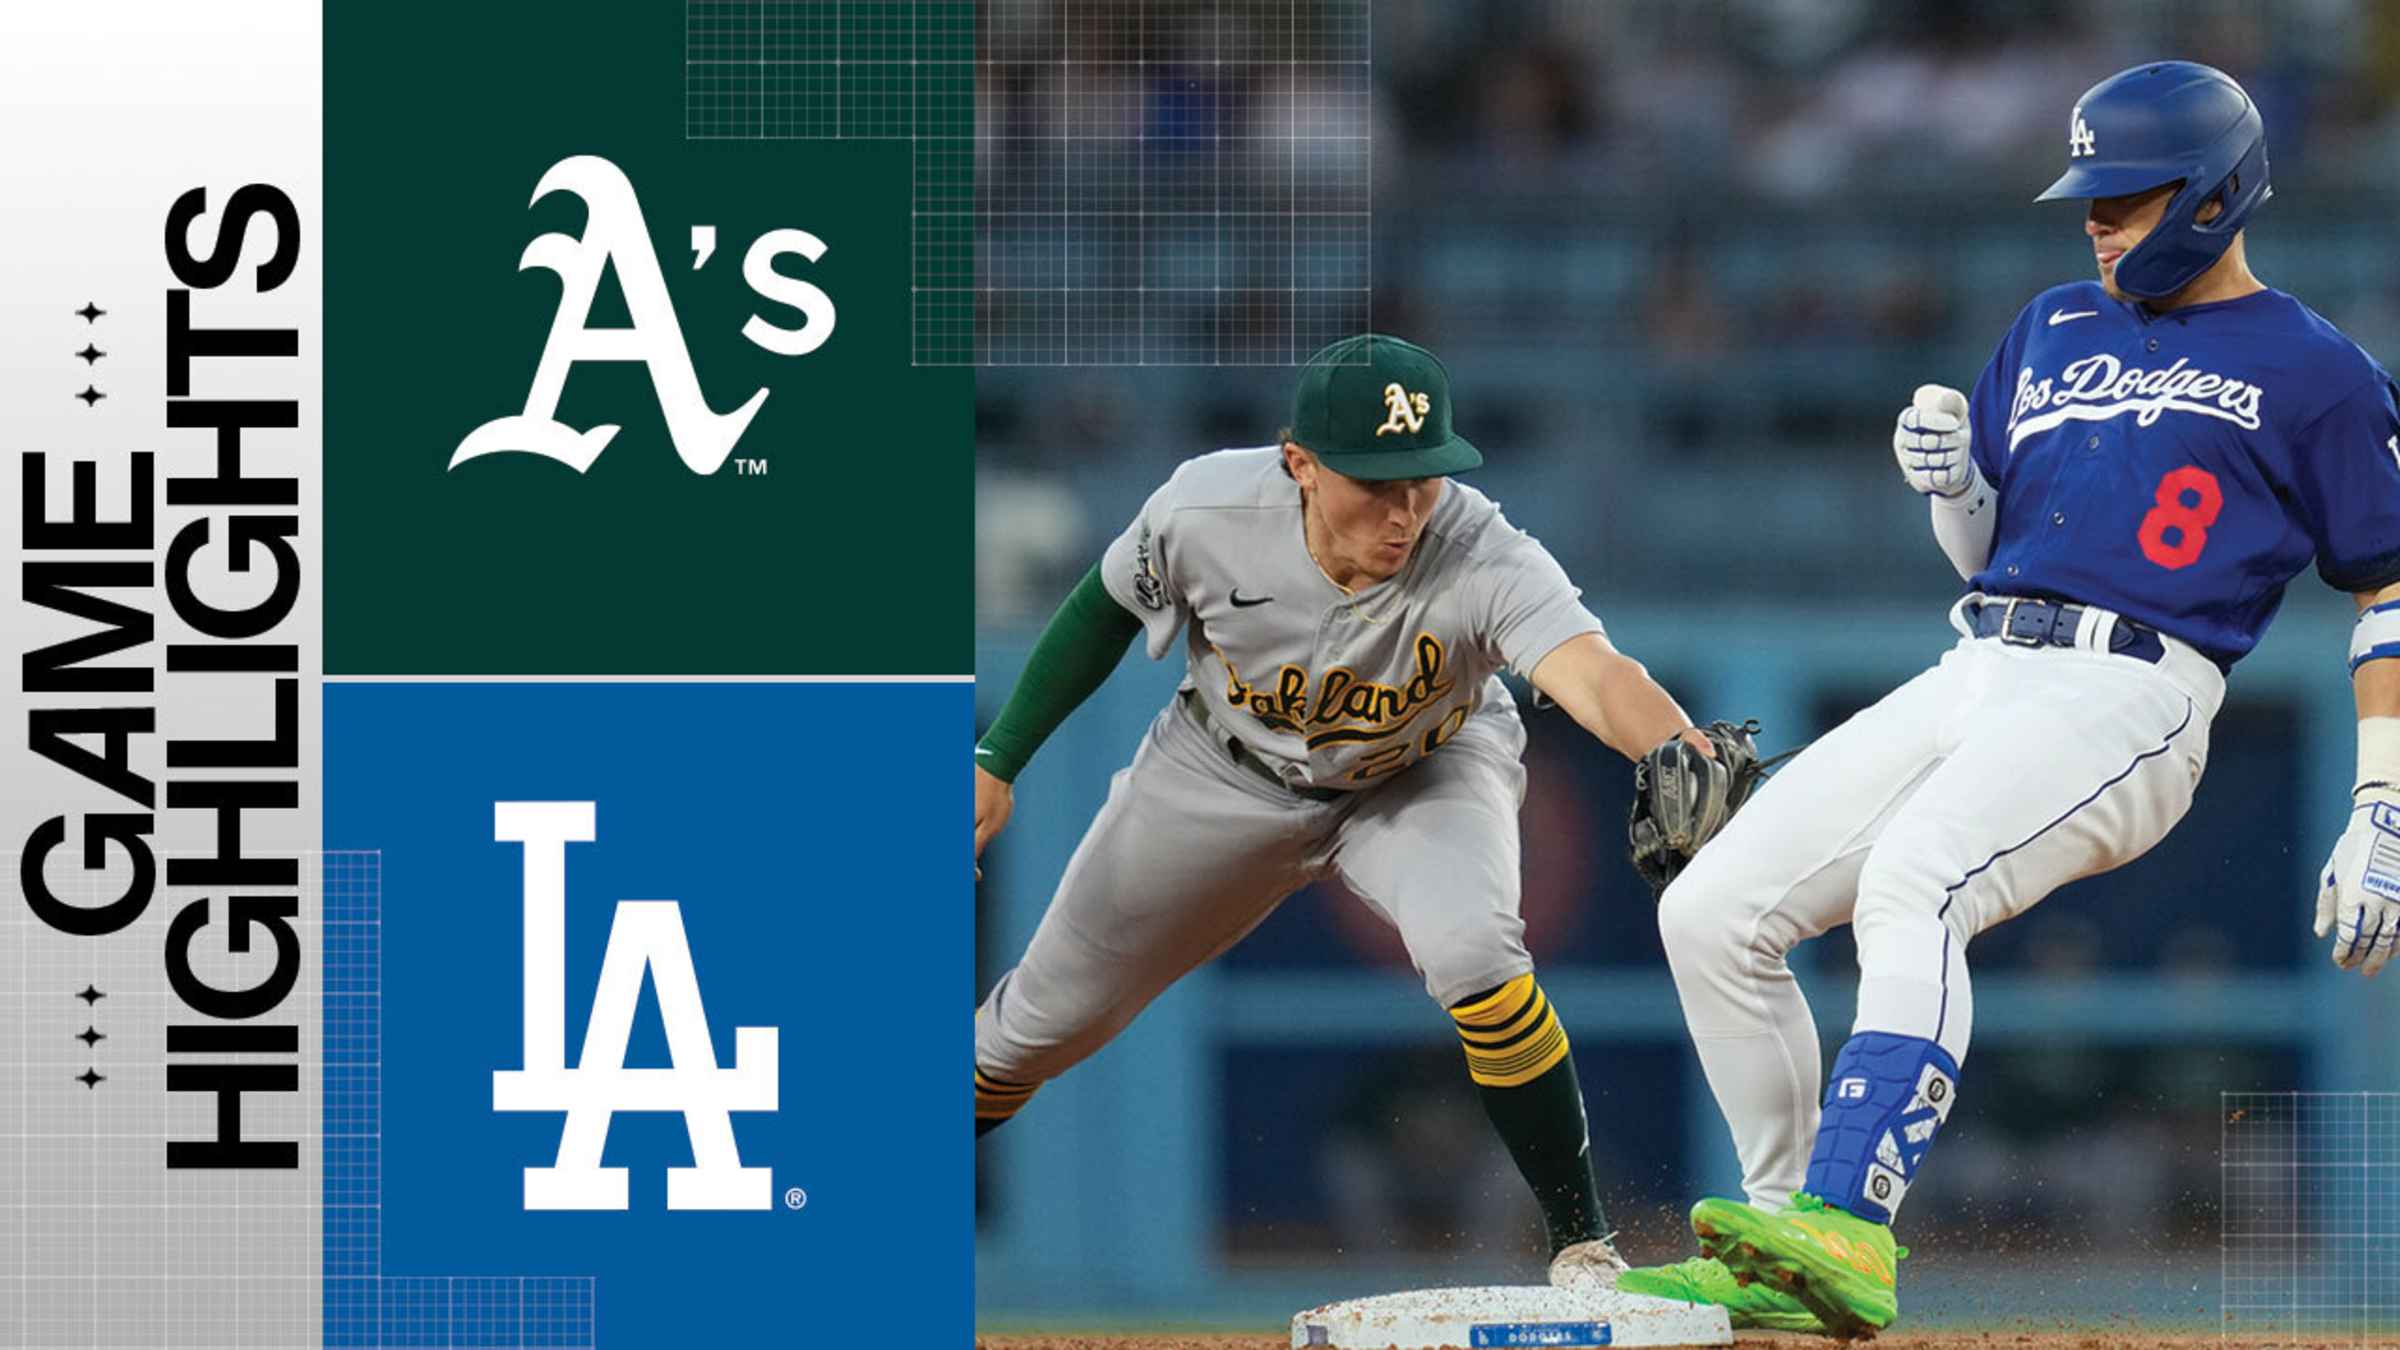 Celebrities at Los Angeles Dodgers game. The Oakland Athletics vs